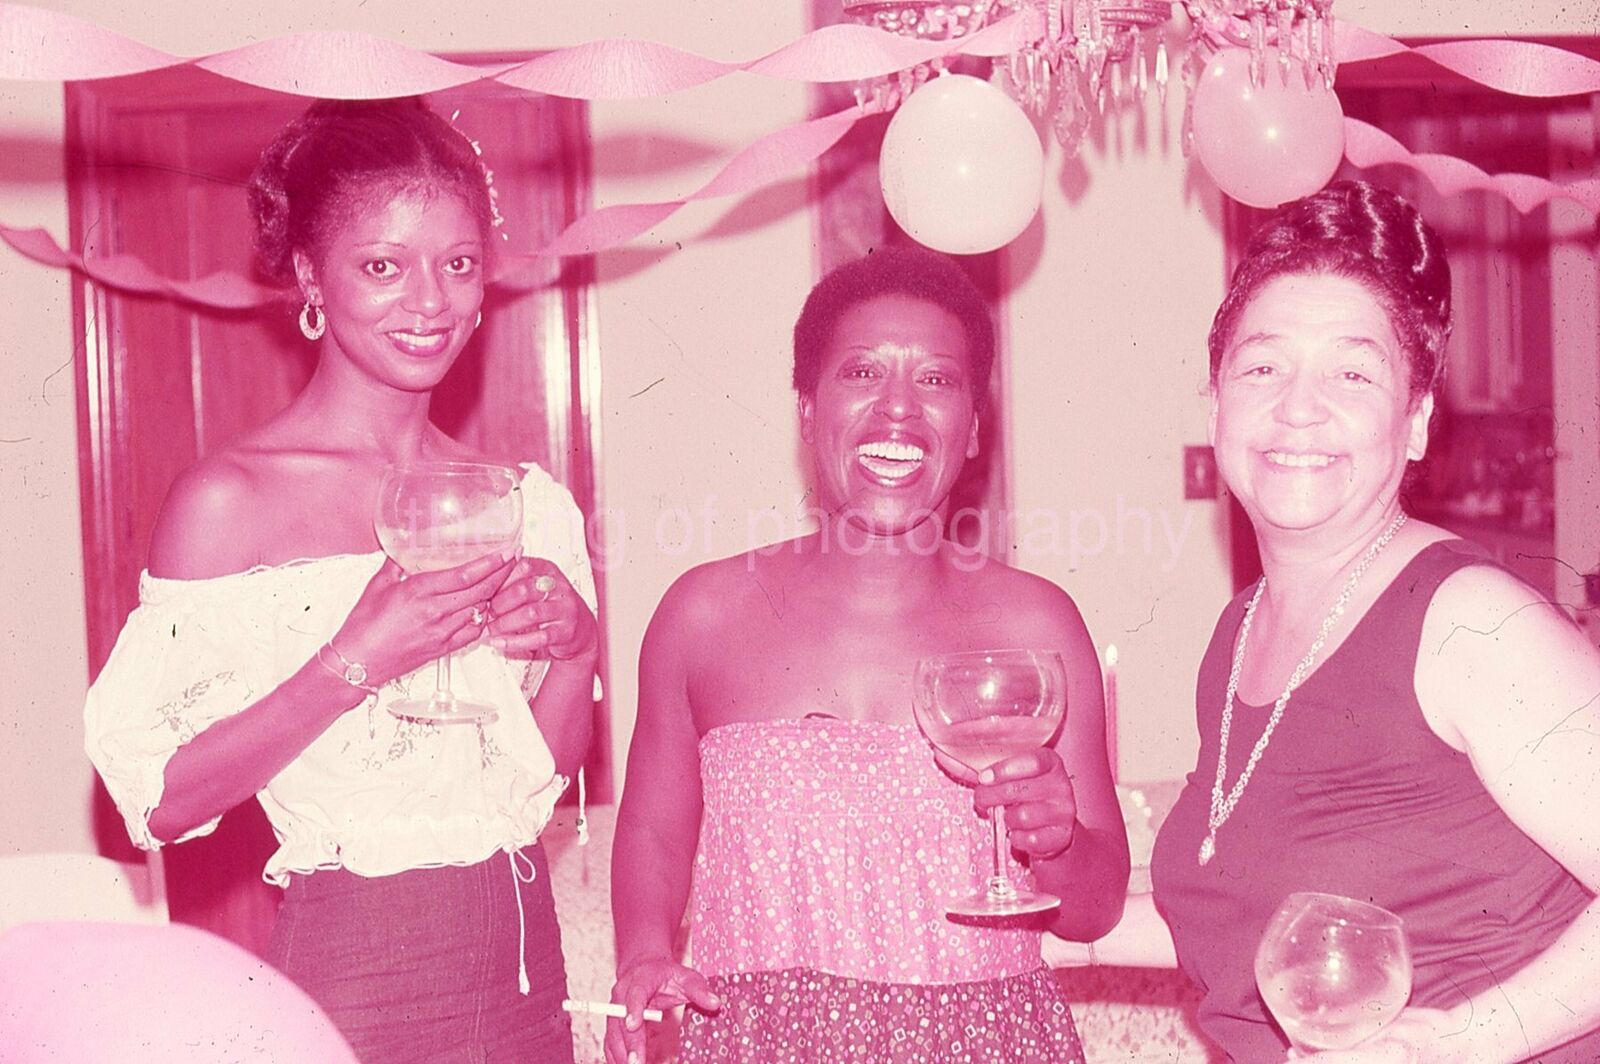 PARTY GIRLS Vintage 35mm FOUND SLIDE Transparency AMERICAN WOMEN Photo 010 T 20